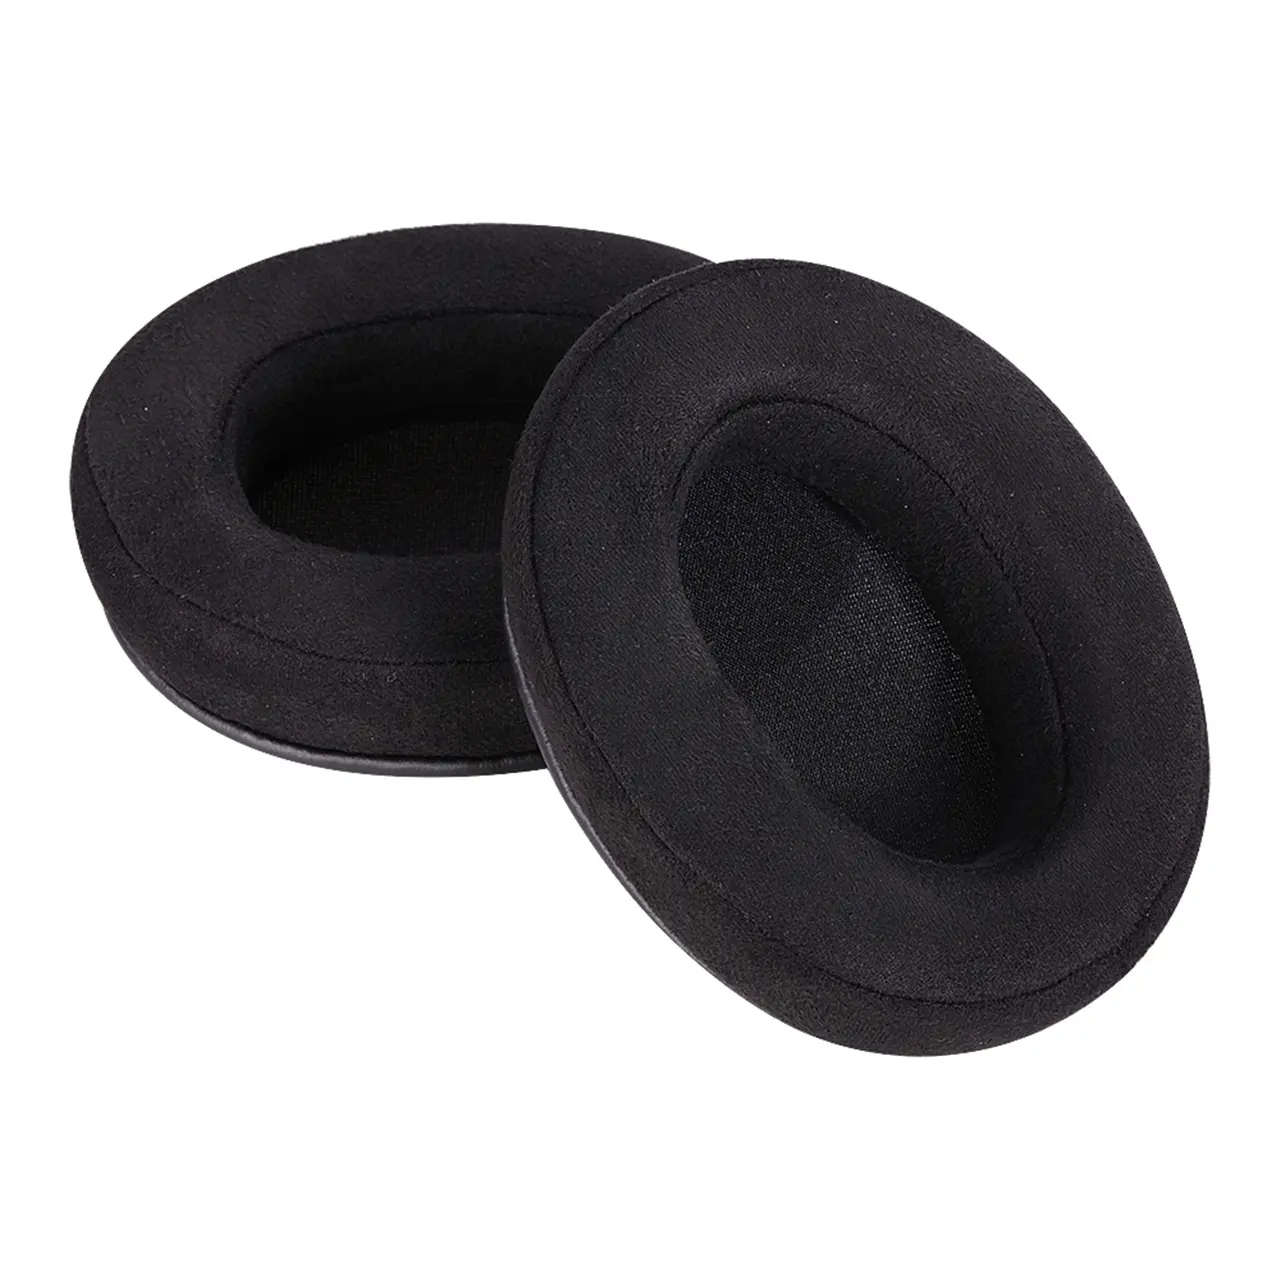 Replacement Ear Pads Fit For Audio Technica Ath-Hm5 Ath-M50 Headphones Earpads Ear Cushion